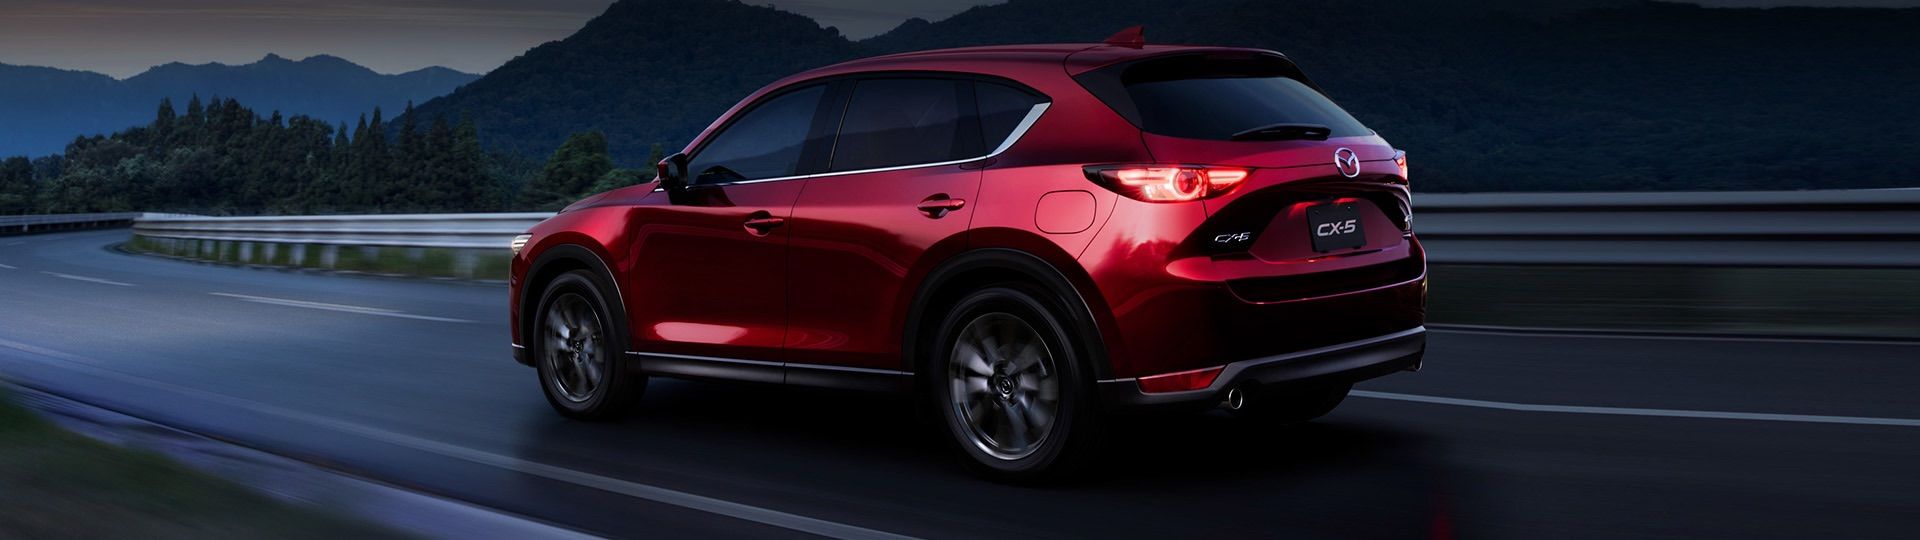 What Mazdas Include Adaptive Front-Lighting? And What Is Adaptive Front Lighting?